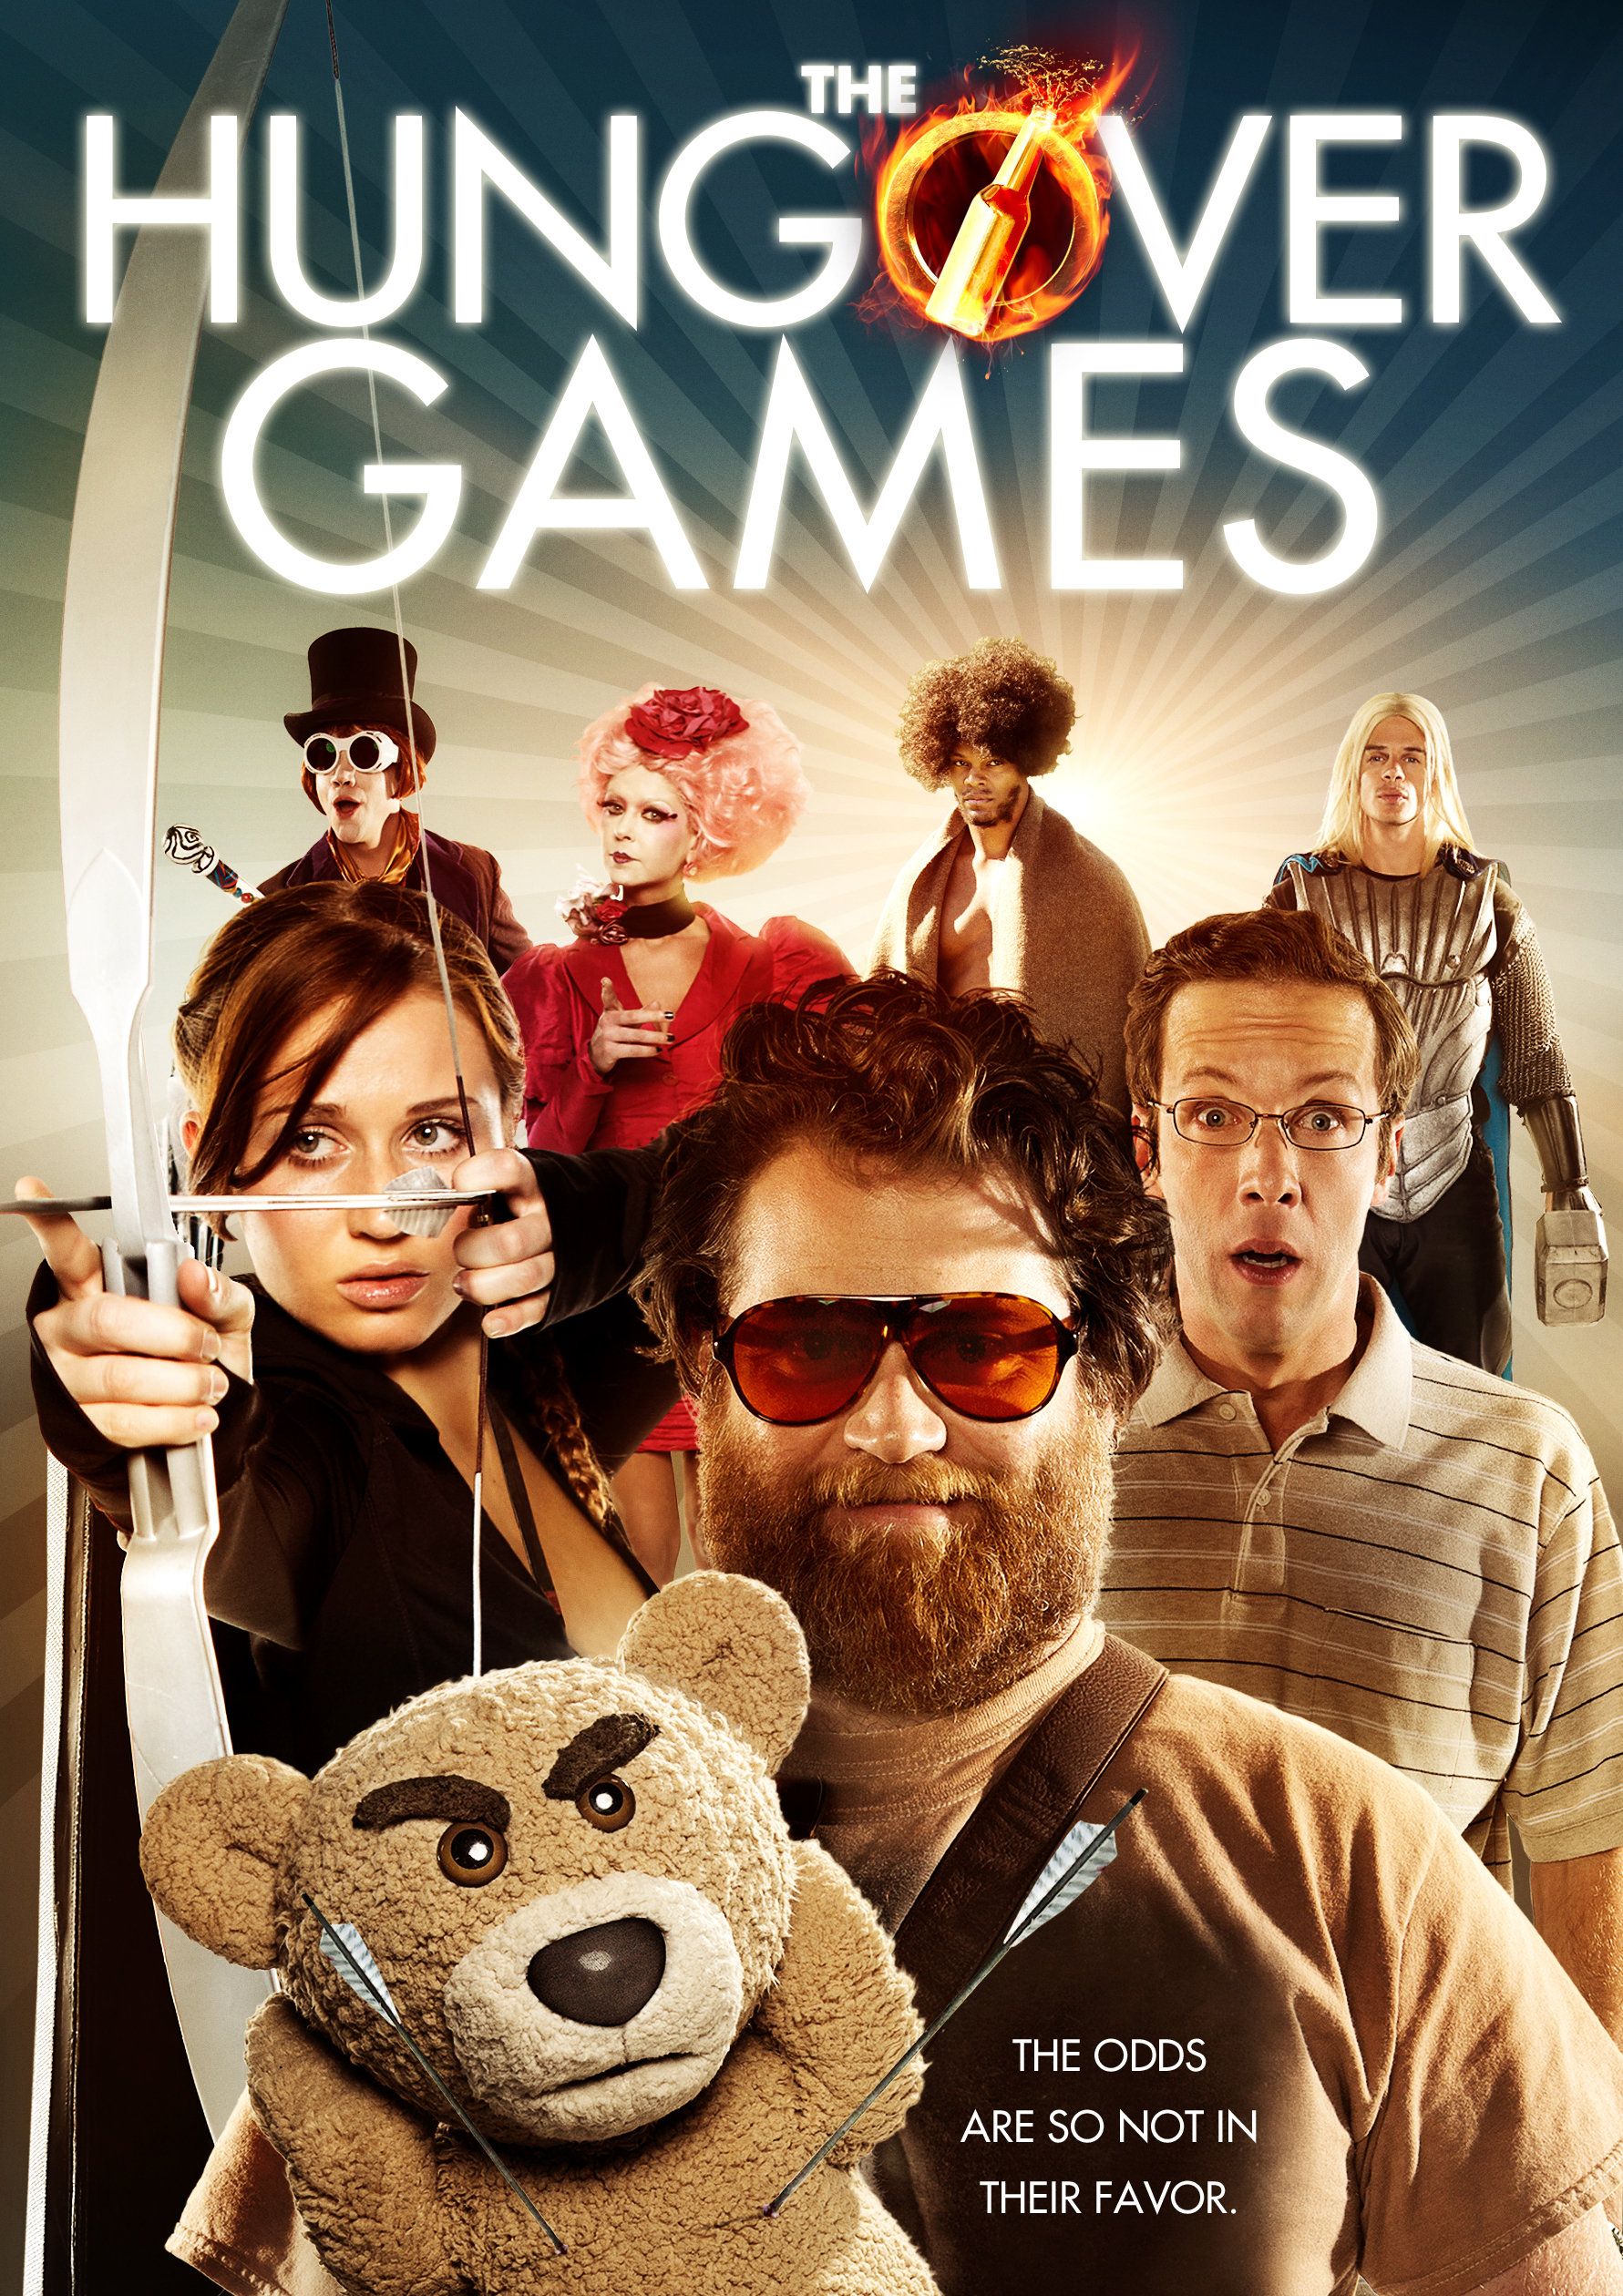 The Hungover Games (2014) Hindi Dubbed Full Movie